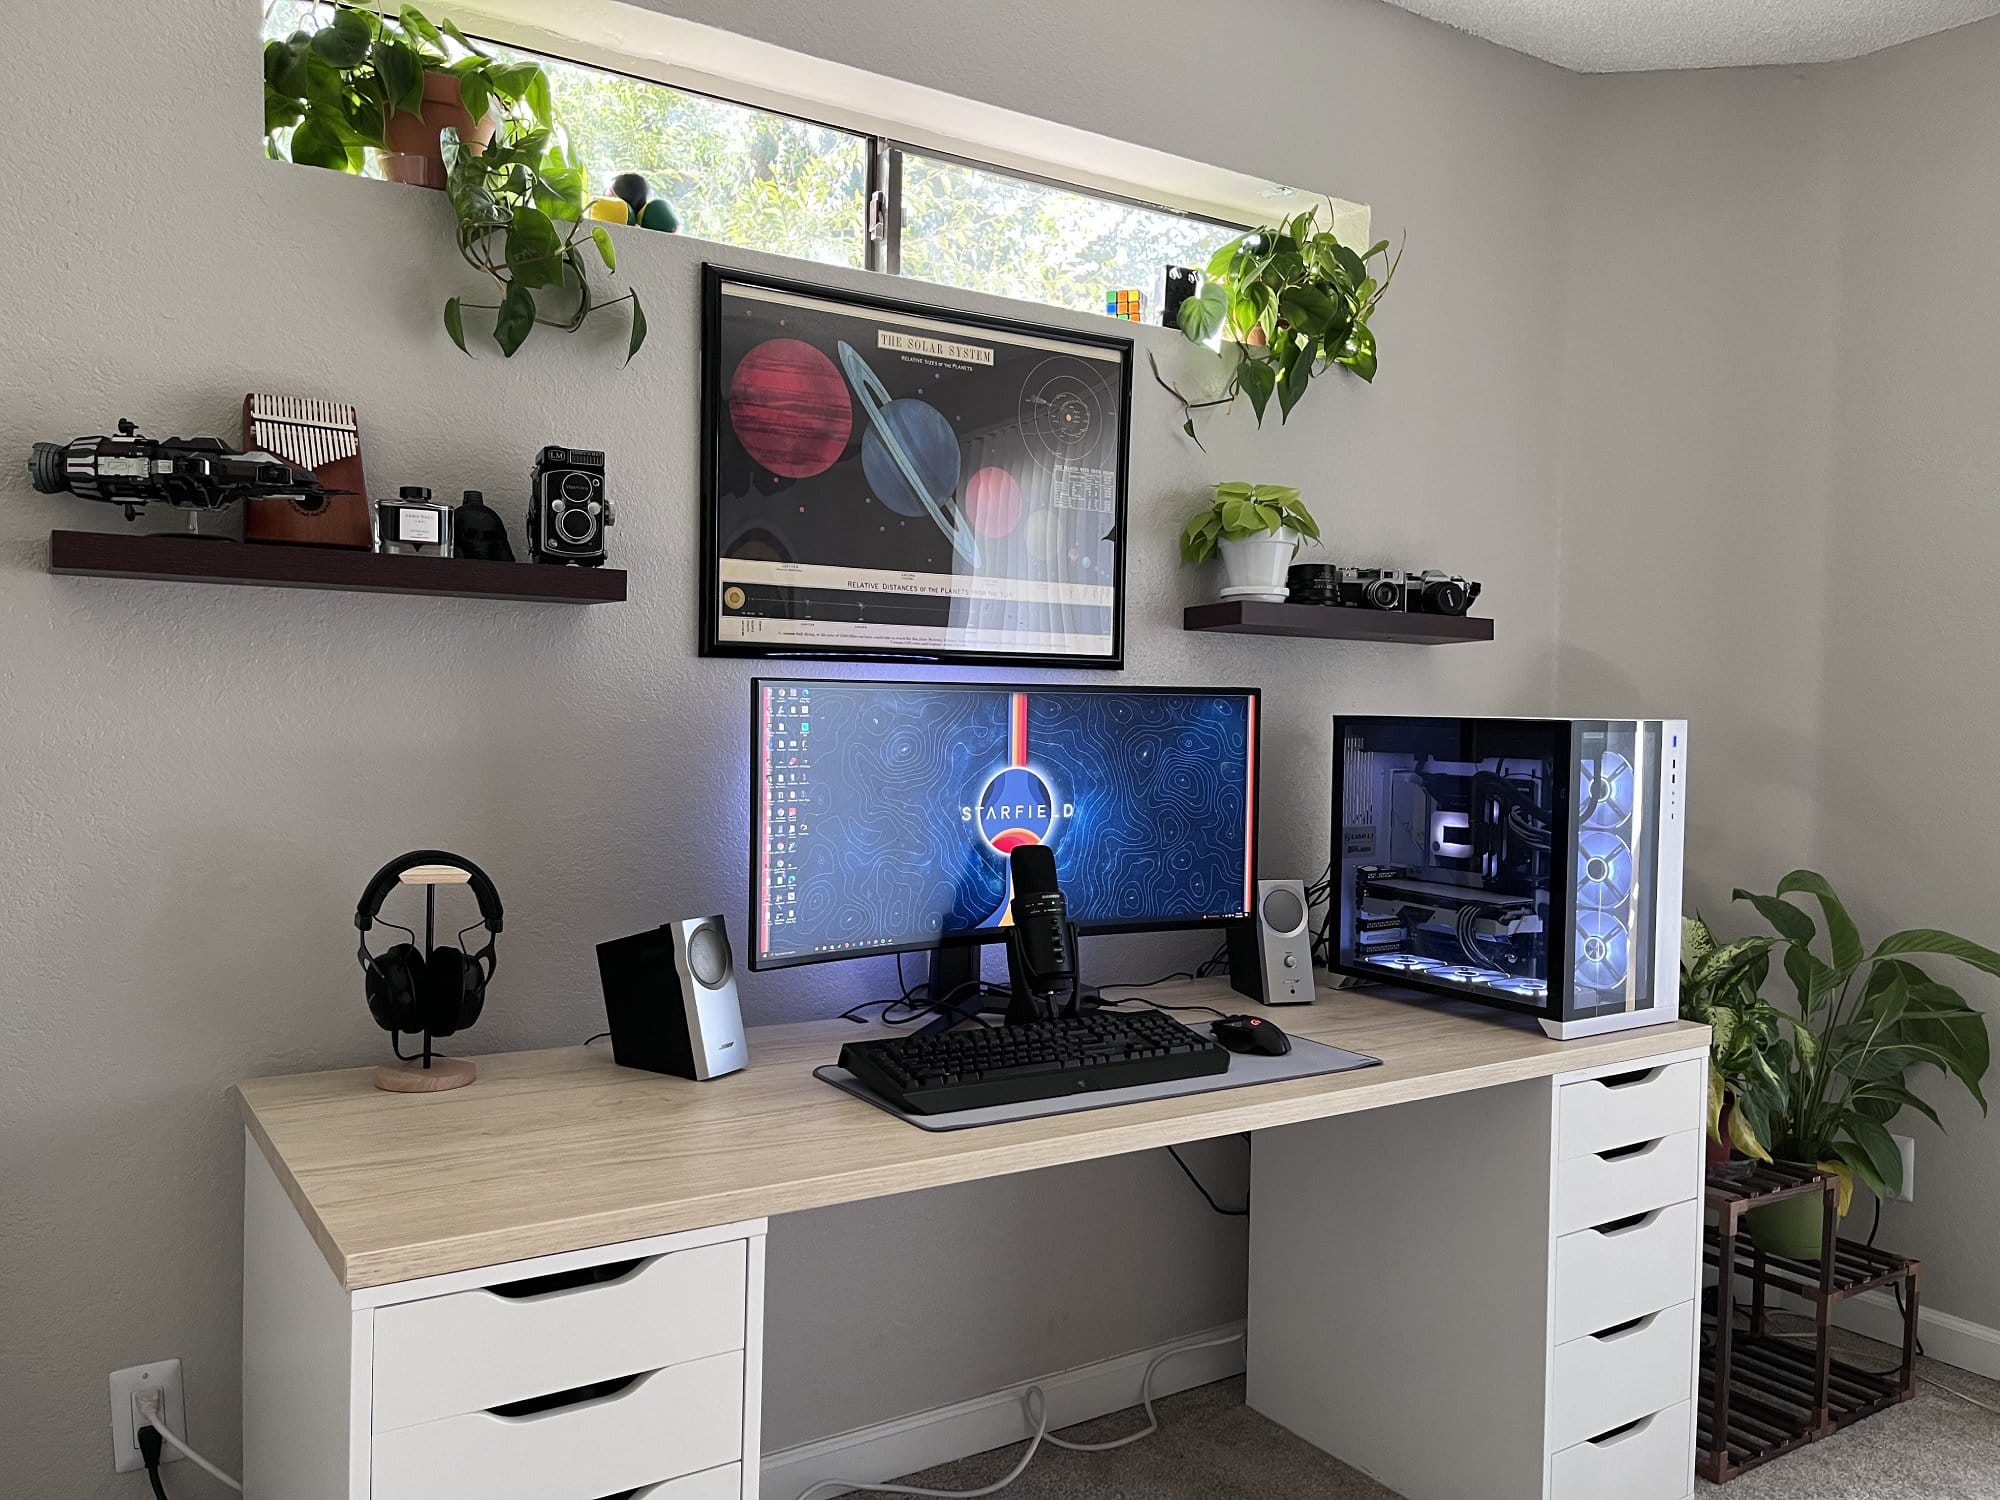 A clean and modern home office setup with a white desk, an ultrawide monitor, a gaming keyboard, a microphone, a speaker, a high-end PC, and shelves adorned with plants and vintage cameras